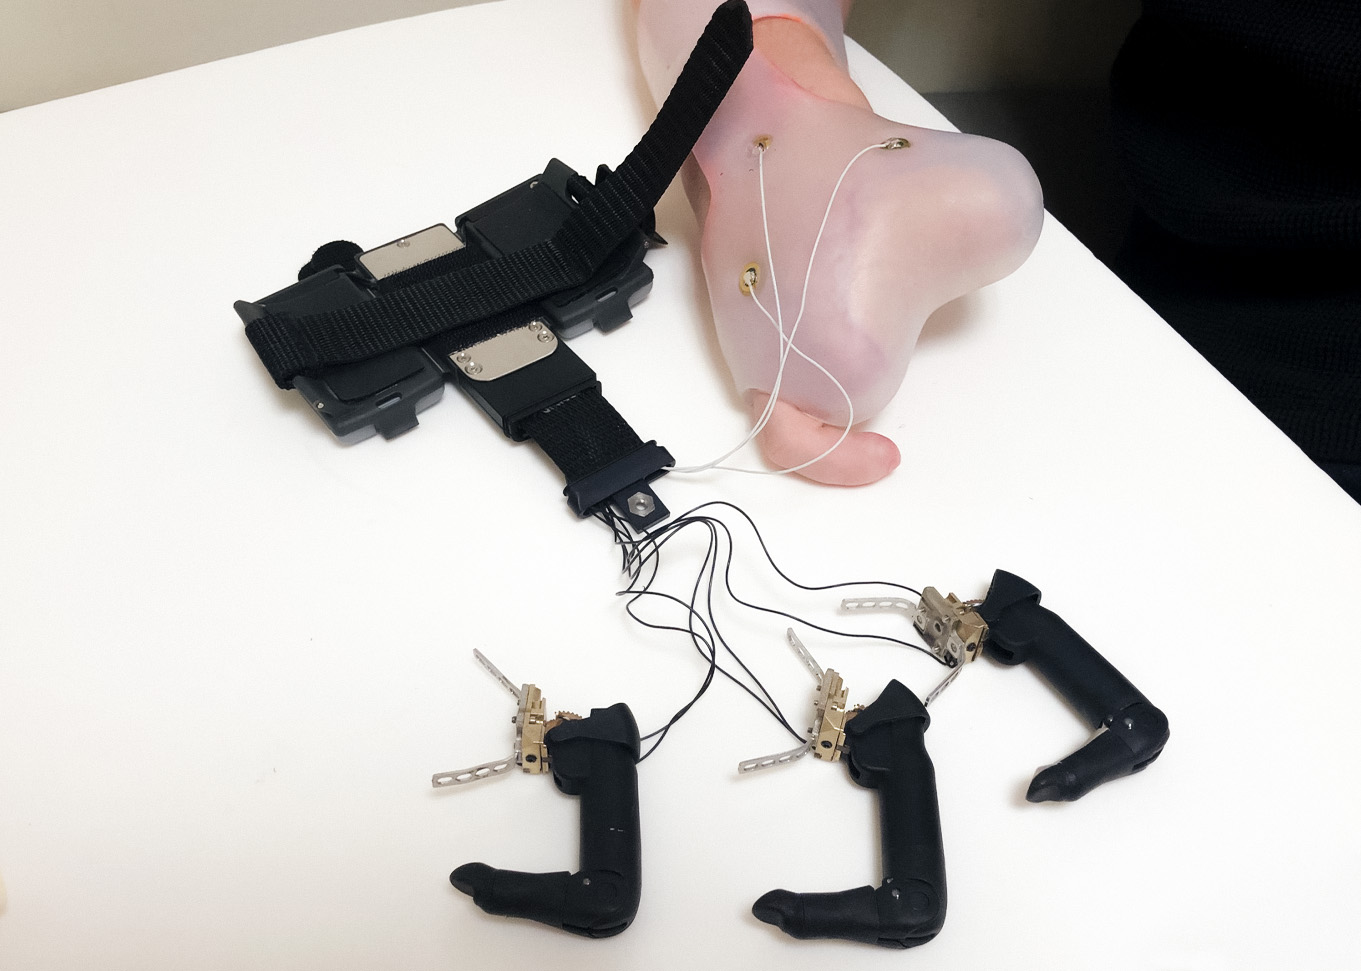 Precision and Control: Prosthetic Hand for Partial Finger and Hand Amputees